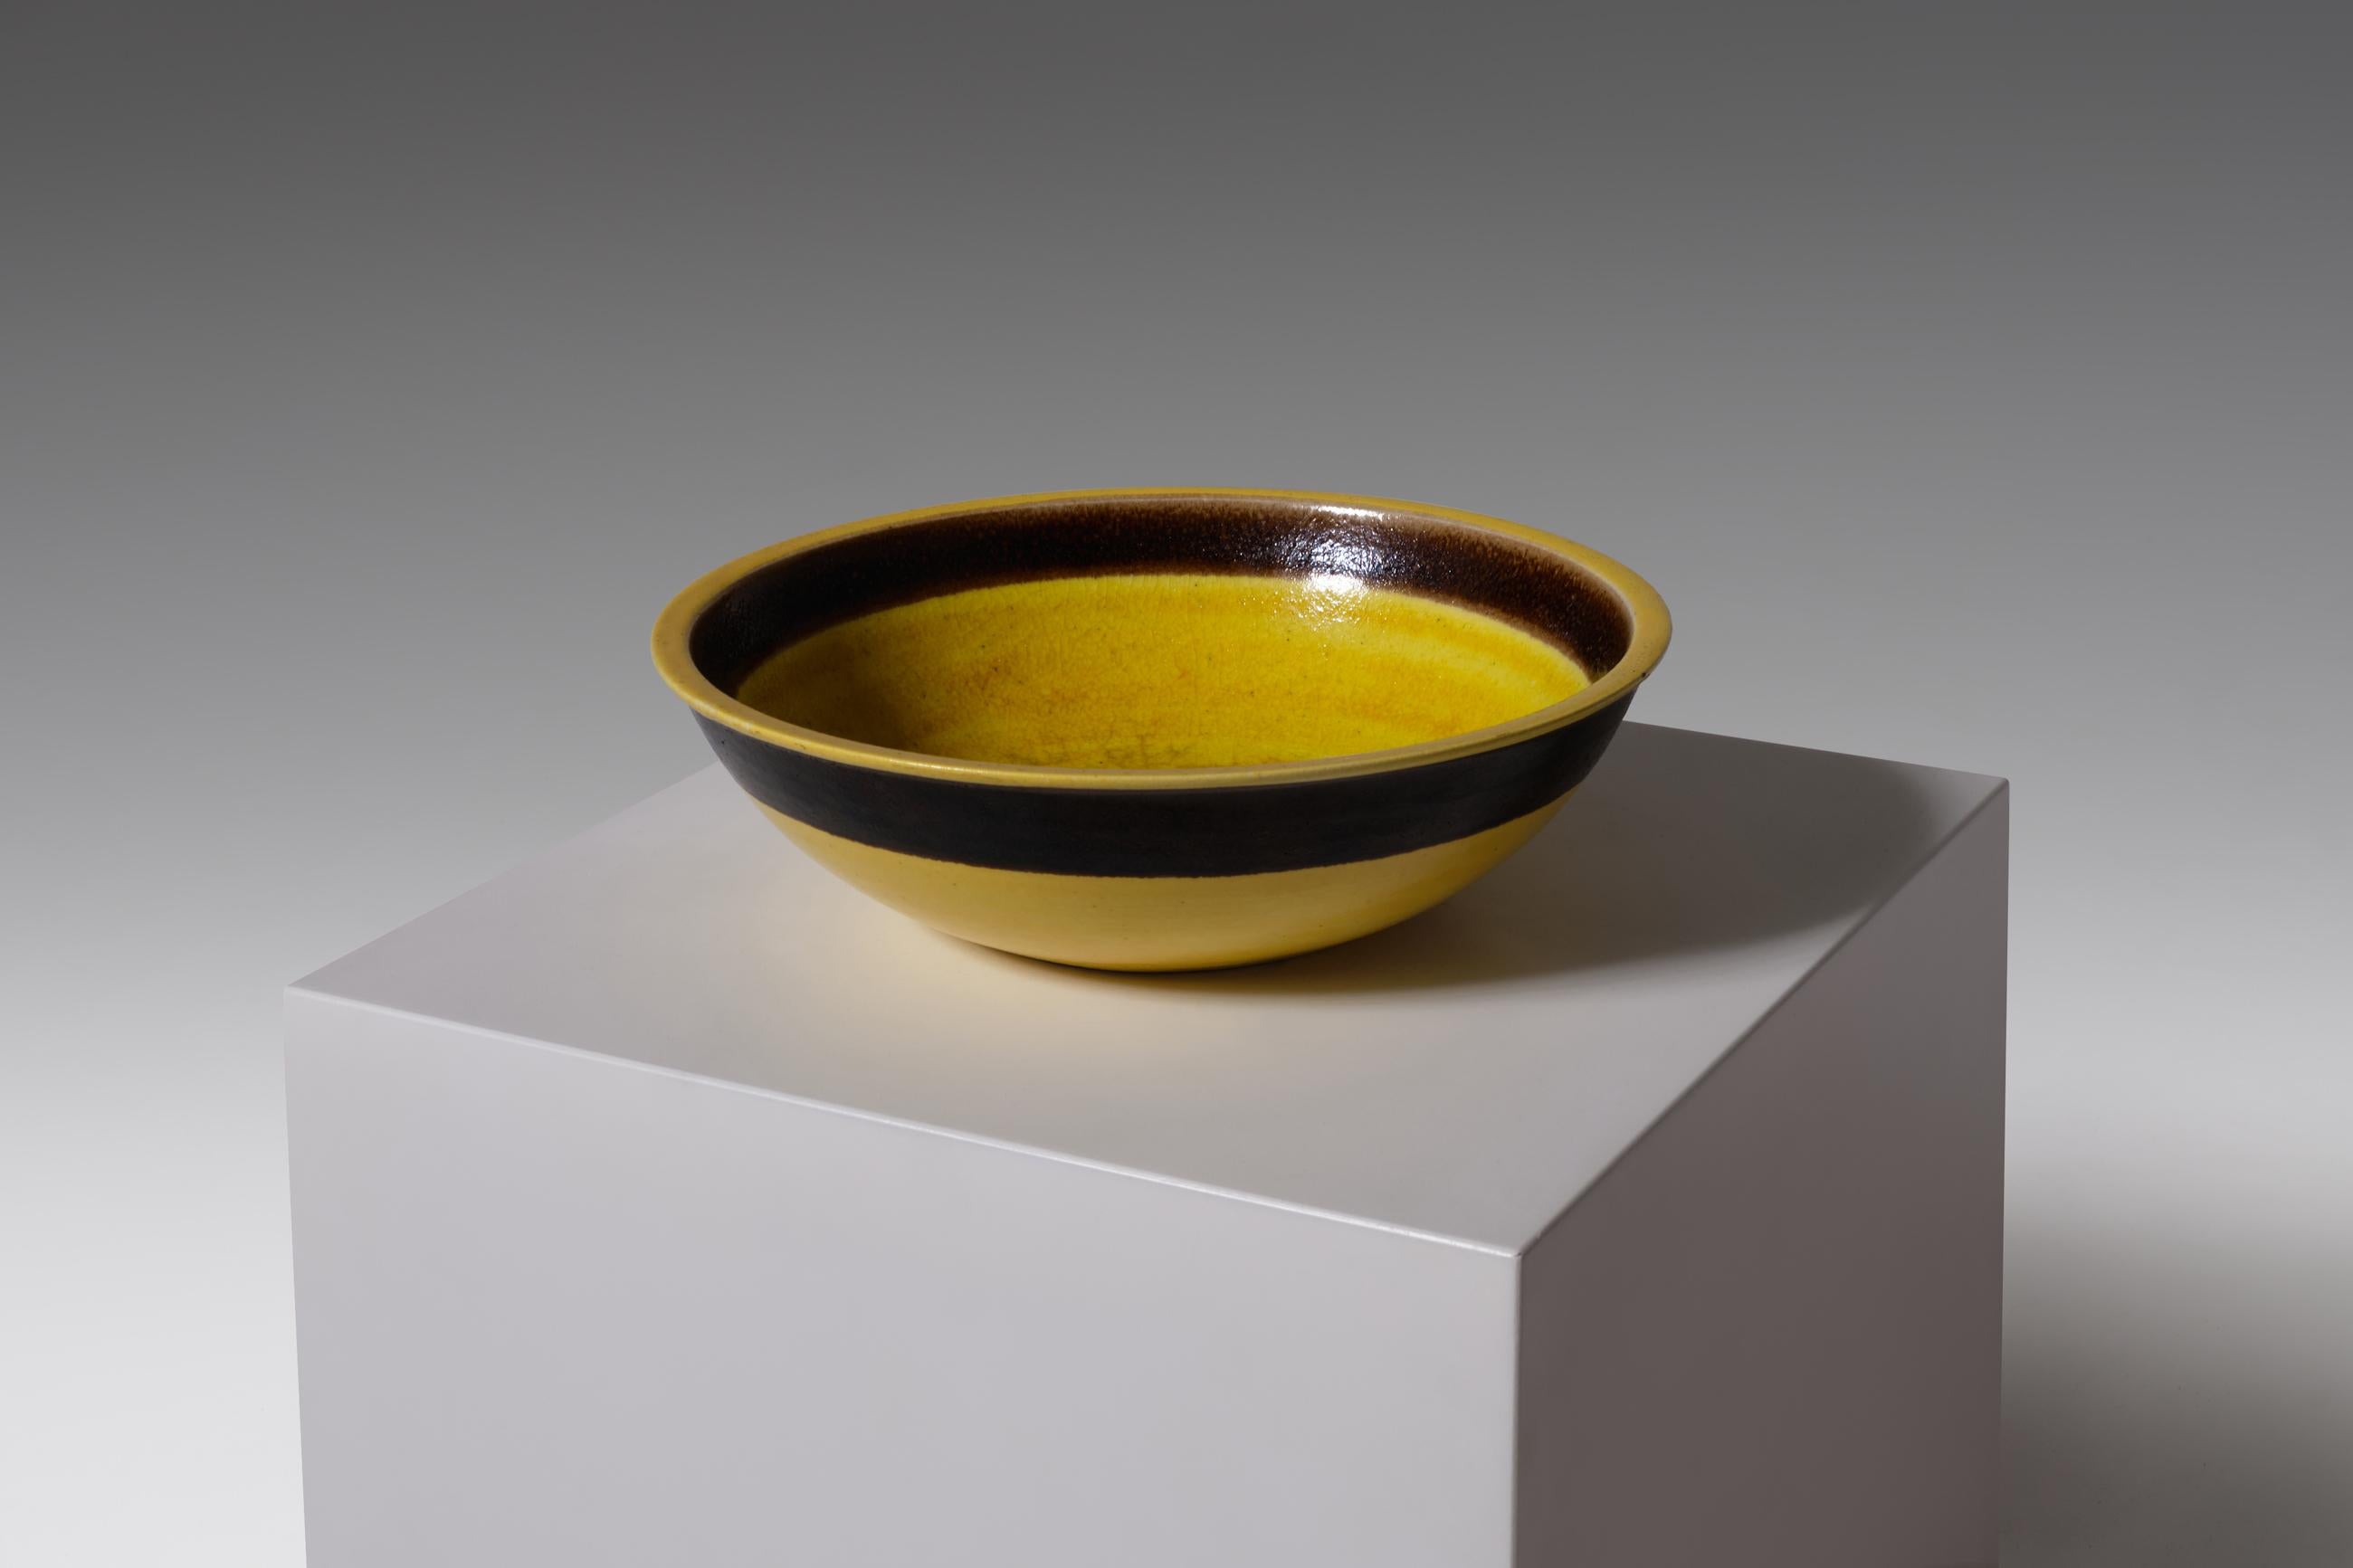 Rare large bowl by Bruno Gambone, Italy, 1970. Outstanding large object in a fantastic bright yellow glaze with a dark brown / aubergine line on the in- and outside. A beautiful crackle pattern is visible inside the bowl, beautiful warm texture. In